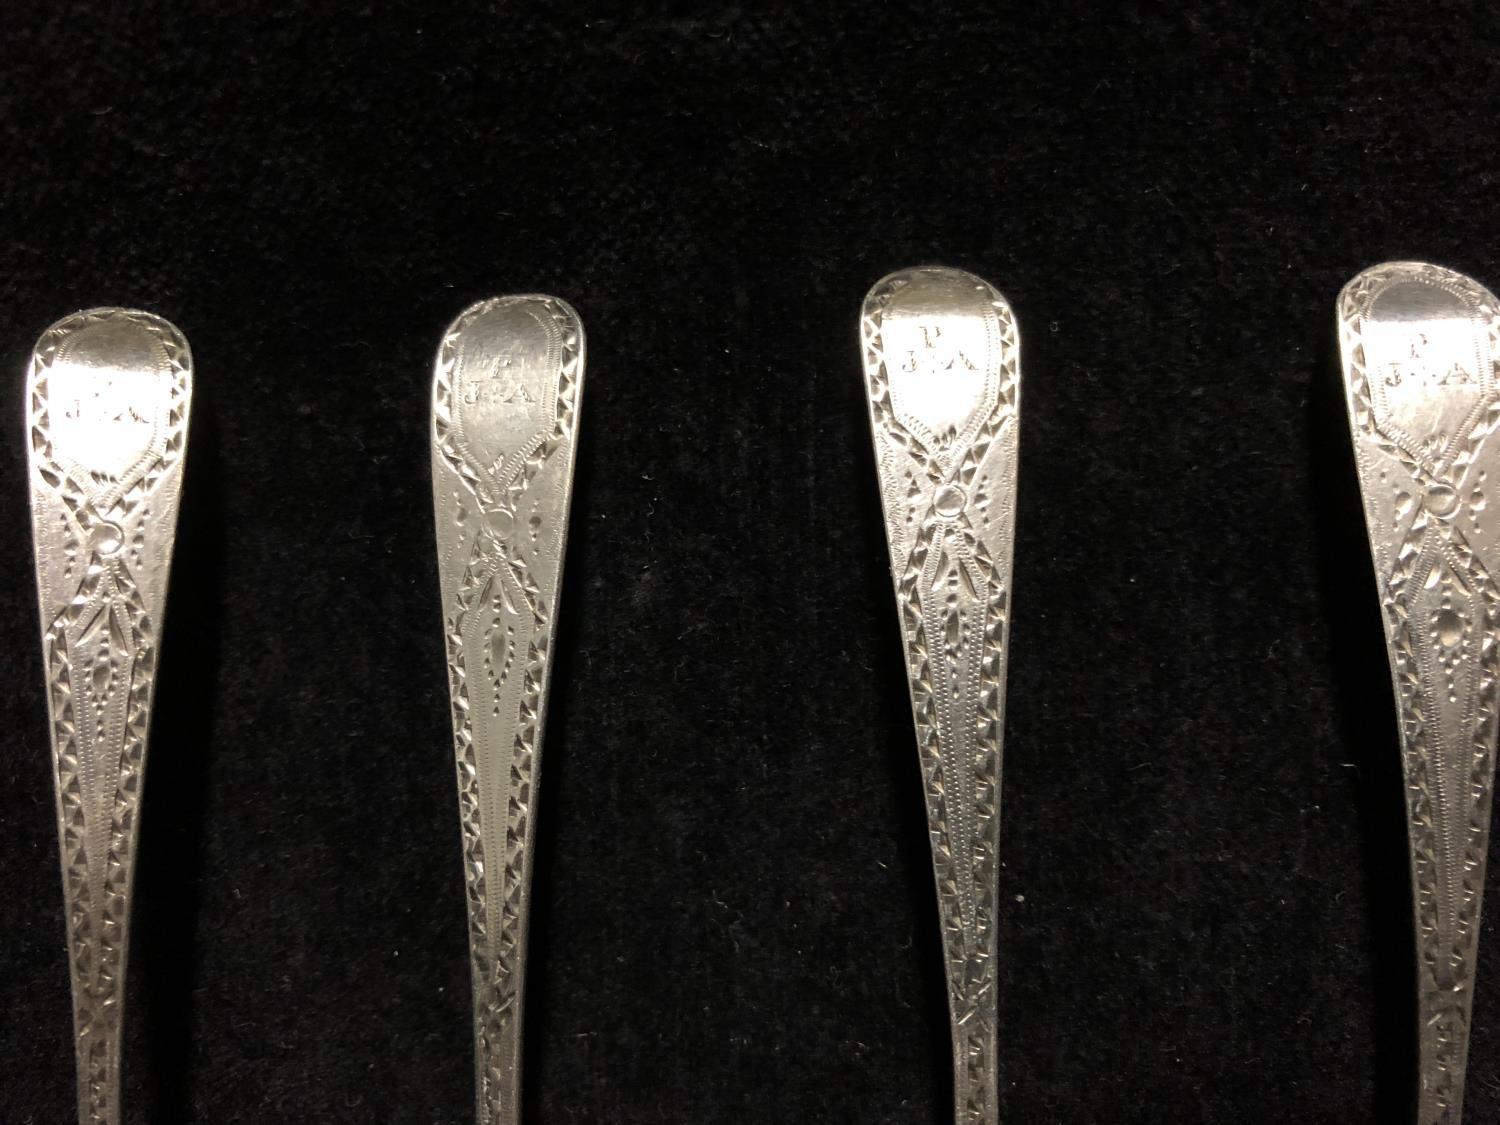 Six silver bright cut decorated tea spoons, London 1790, makers mark of TW (6) - Image 3 of 5